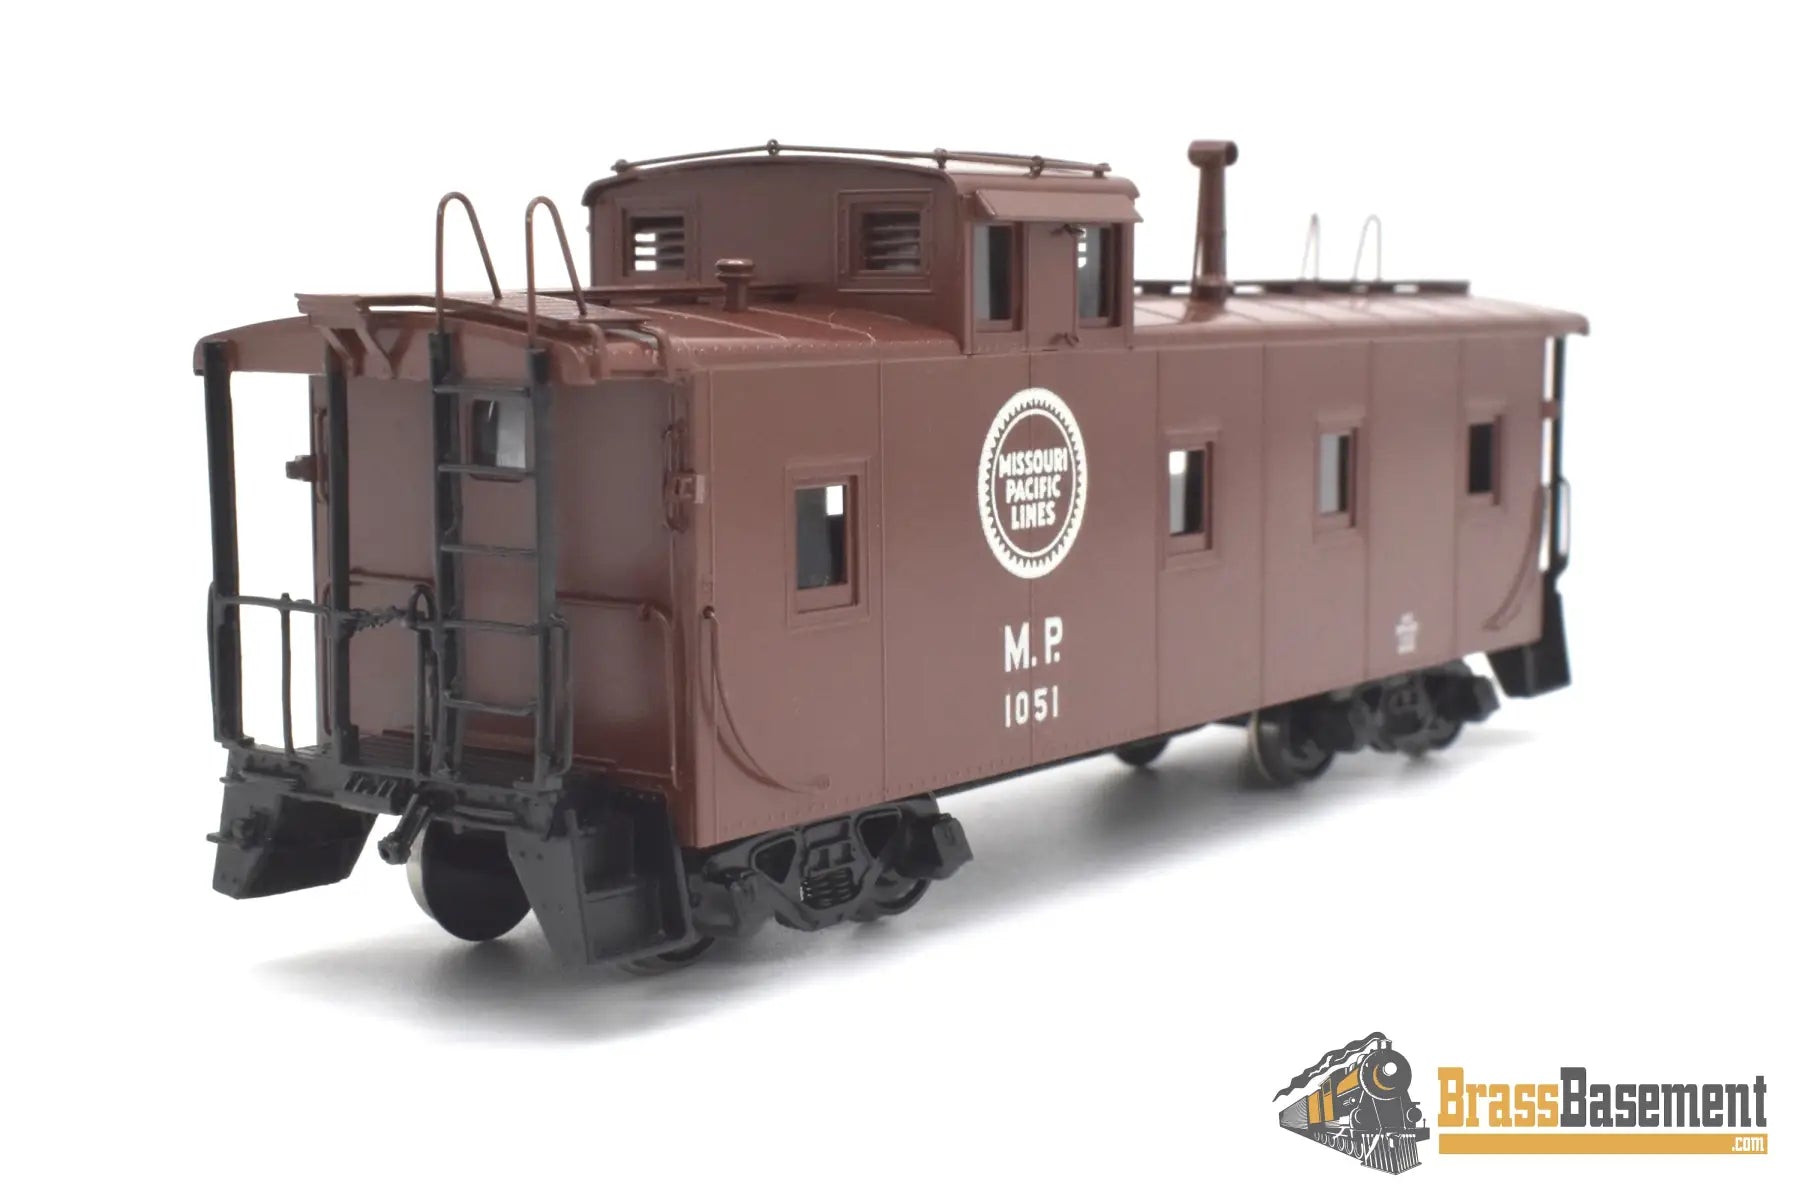 Ho Brass - Omi 1272.1 Missouri Pacific Mp Steel Caboose #1051 W/ Partial Rivets Cpomi